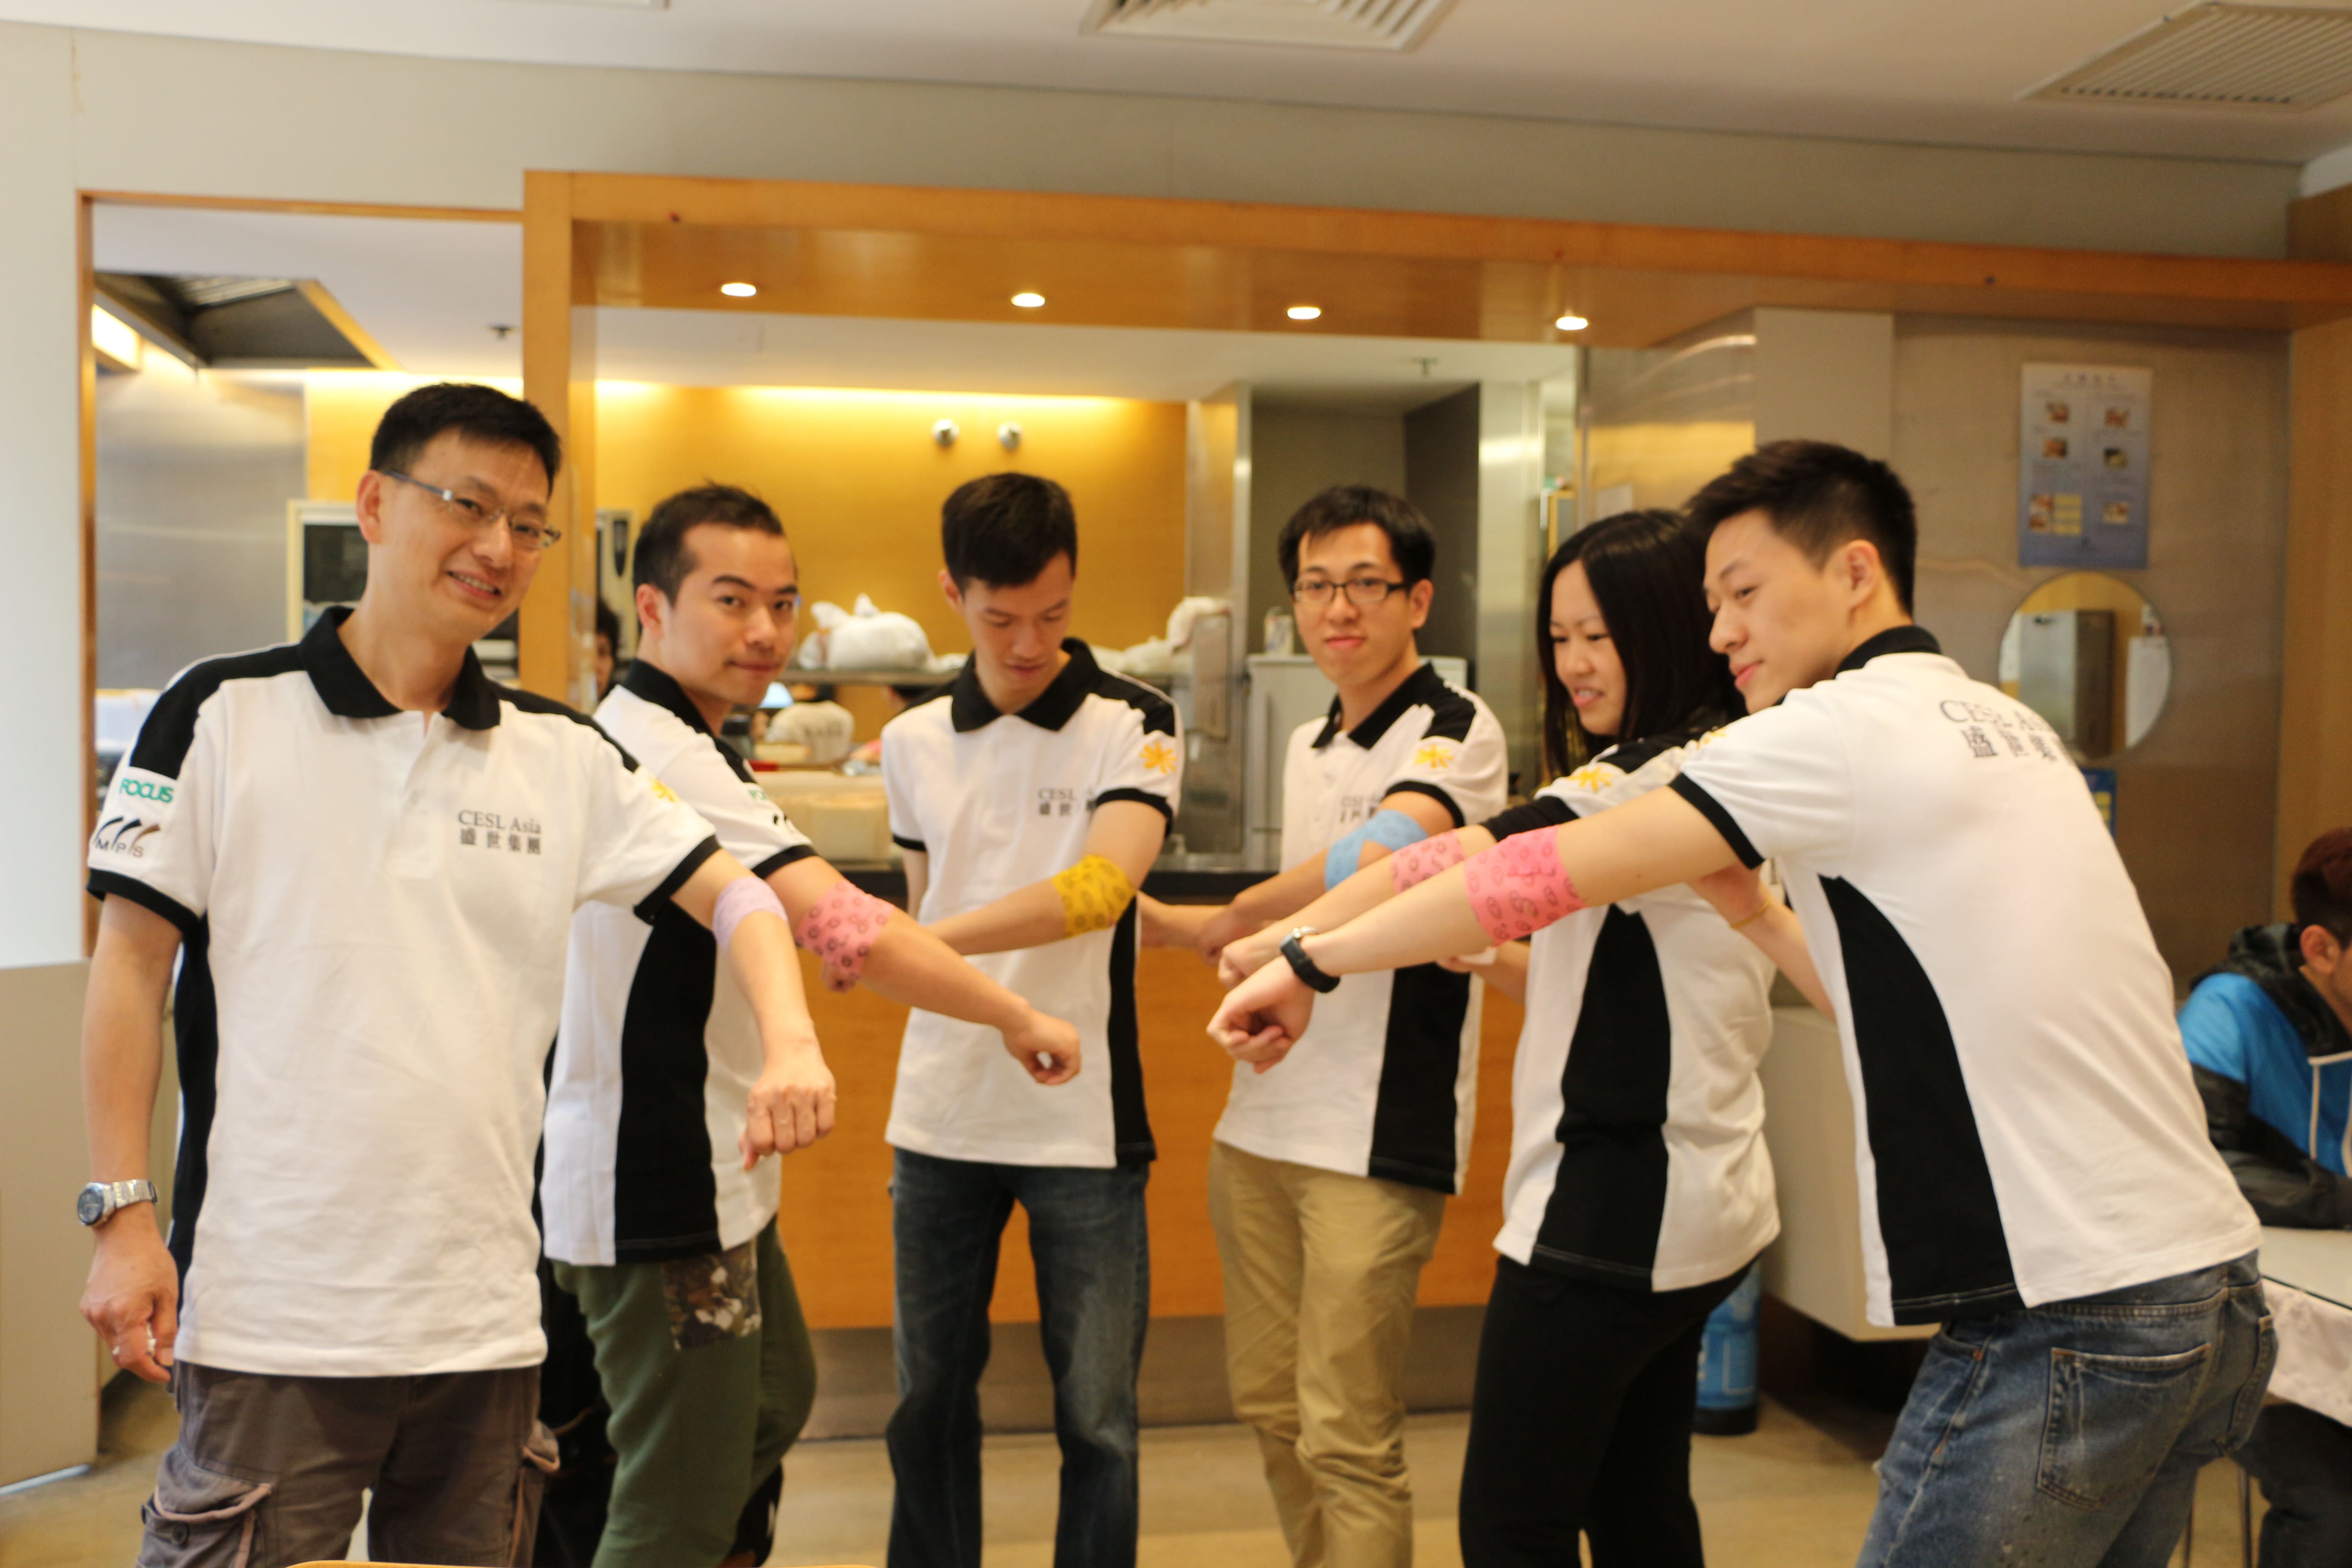 CESL Asia encourages its staff to promote social responsibility through blood donation activity